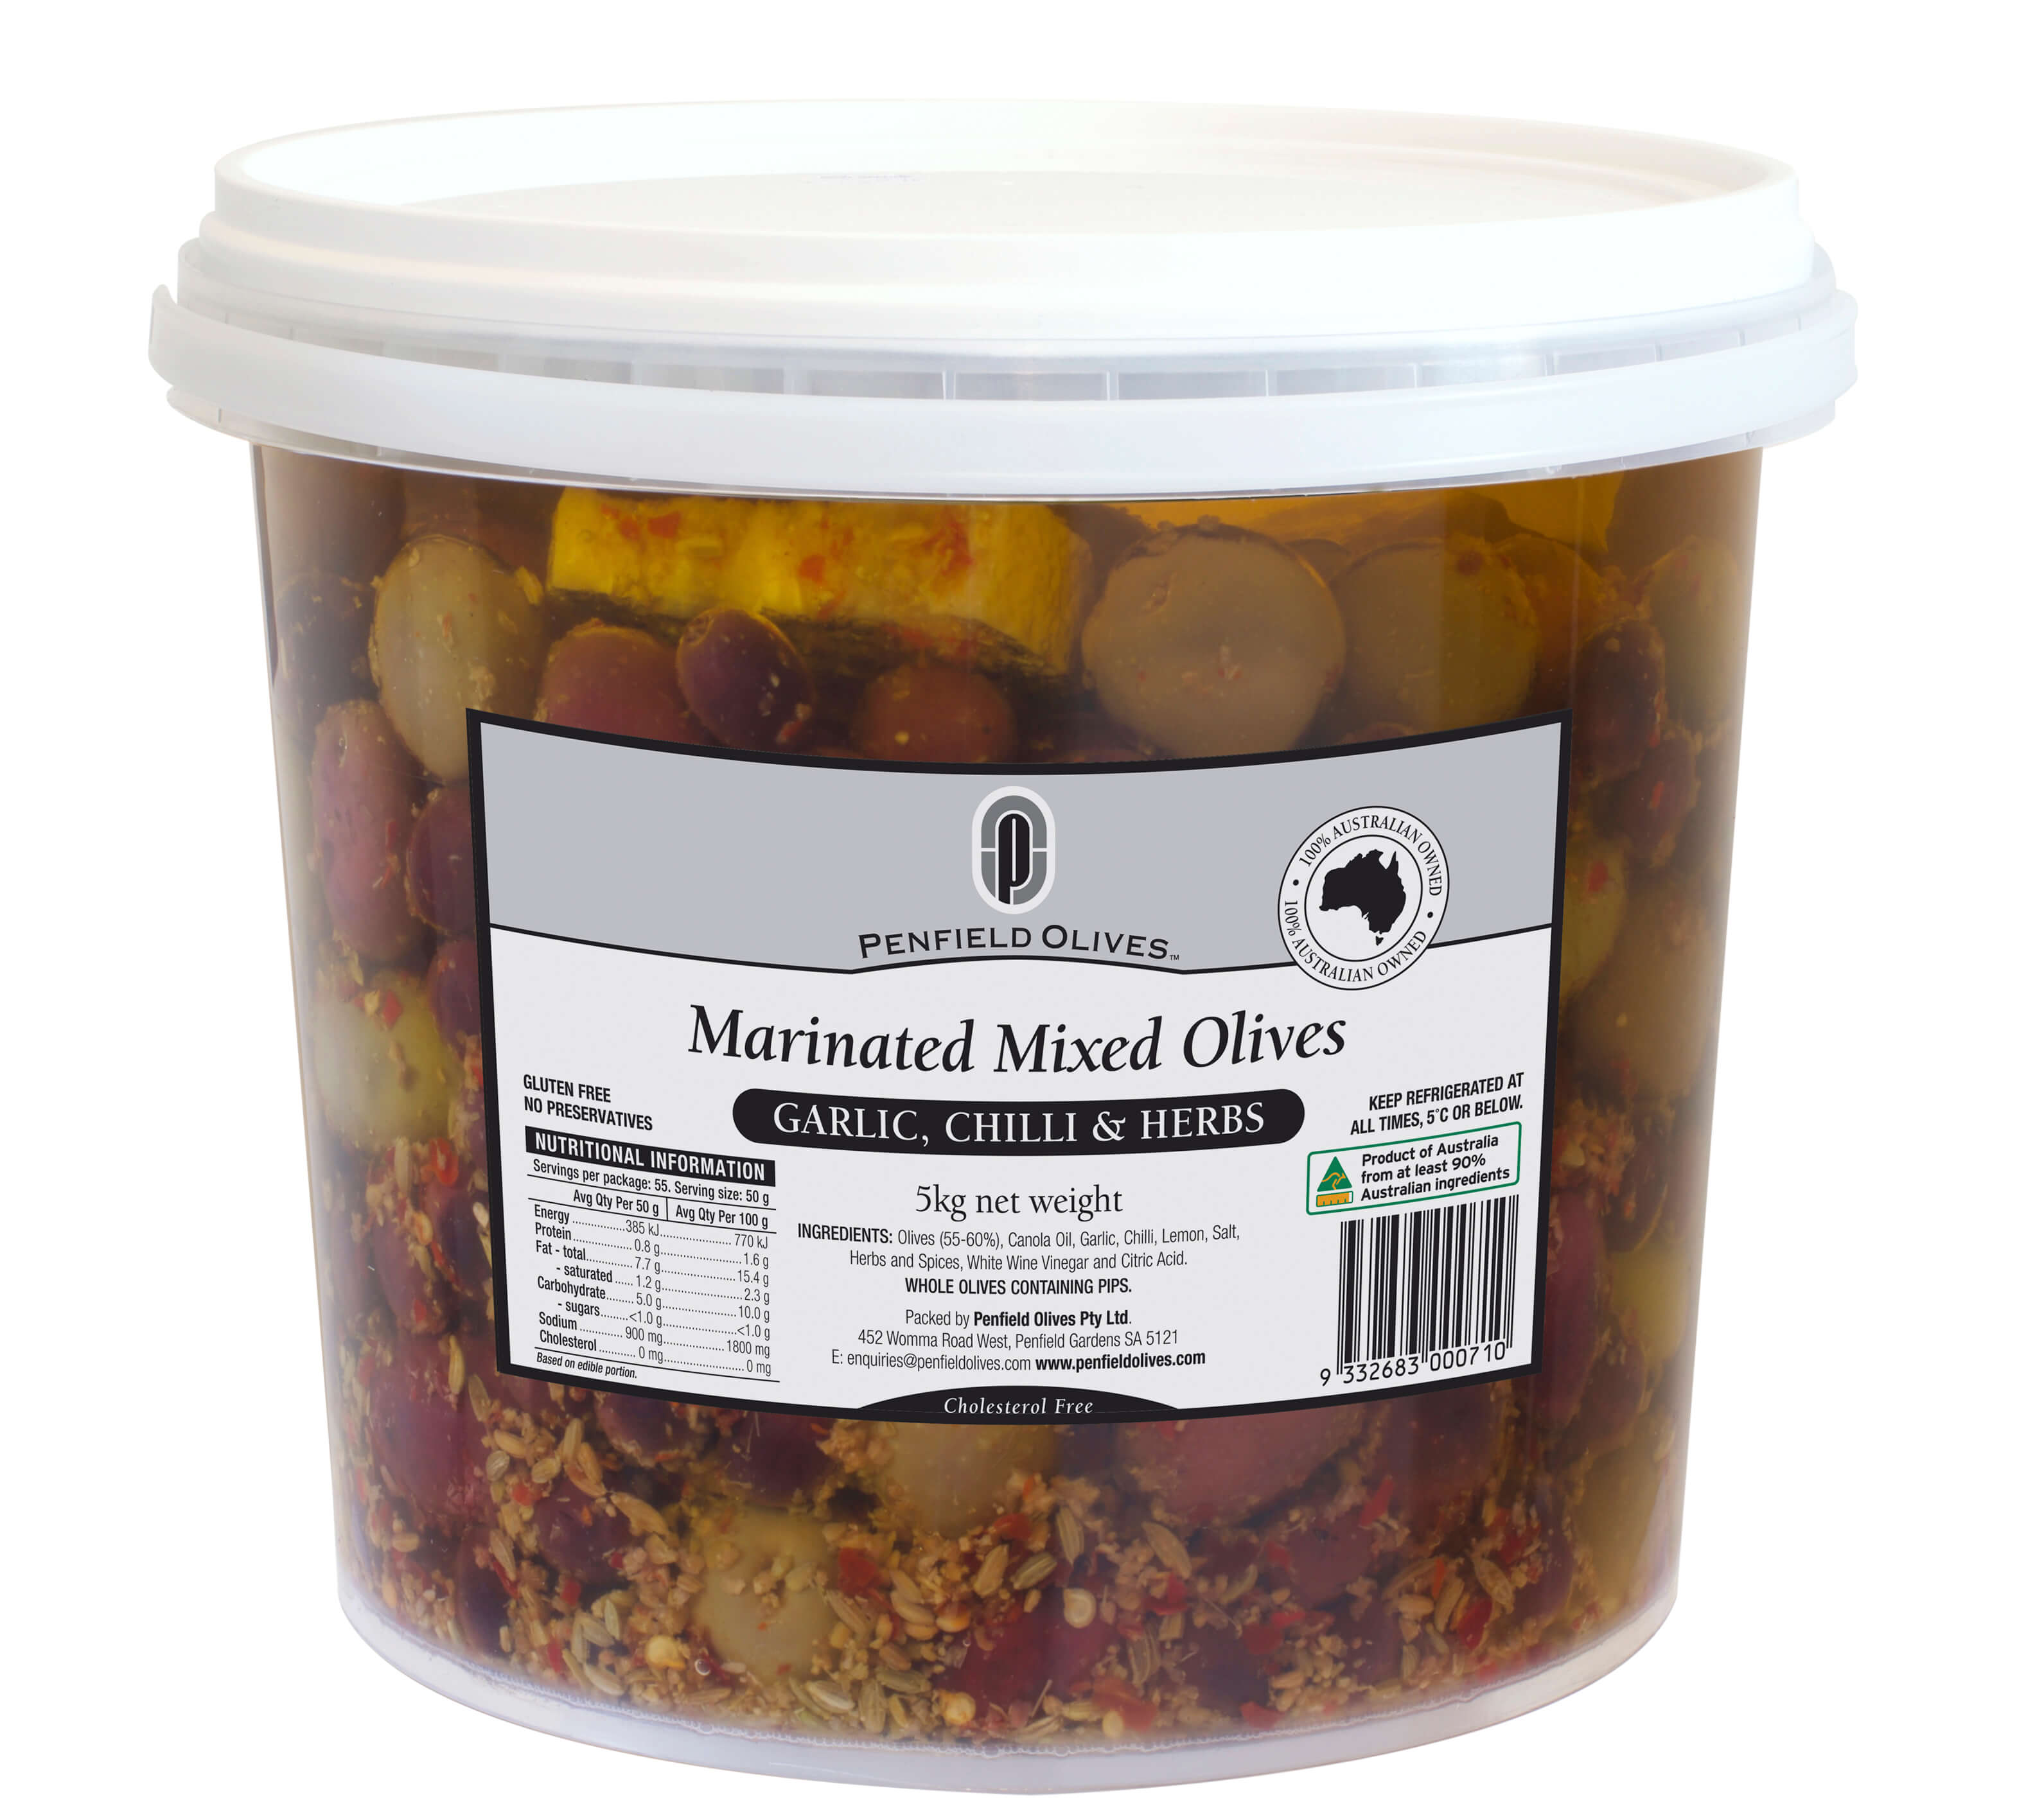 Penfield Olives food service page pic, 5kg Mixed Marinated Olives in Garlic, Chilli and Herbs in a clear container with a white lid.